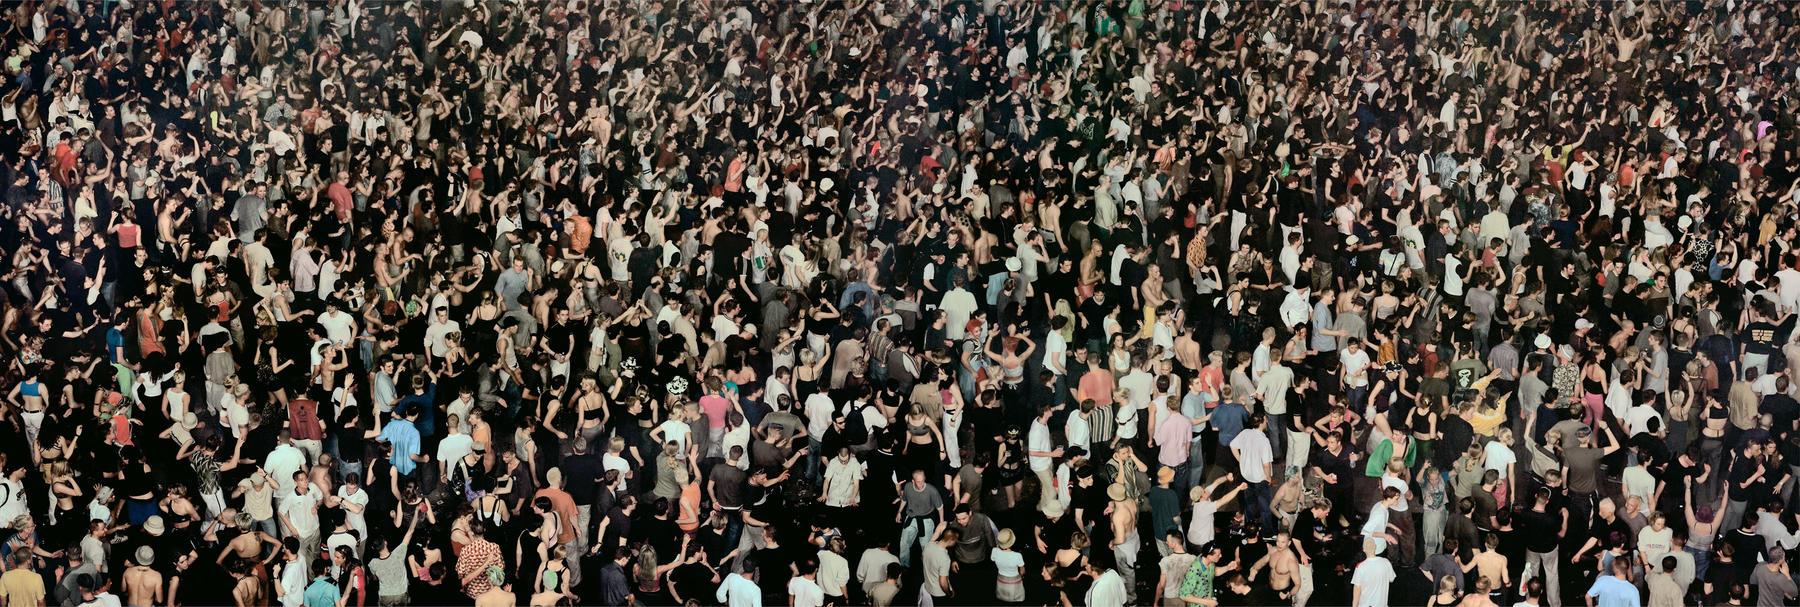 Internationalism vs Globalisation: Why progressives across Europe and beyond must forge a common internationalist movement – Talk at the Royal Festival Hall, accompanied by Andreas Gursky’s images and Danae Stratou’s ‘The Globalising Wall), 9 APR 2018